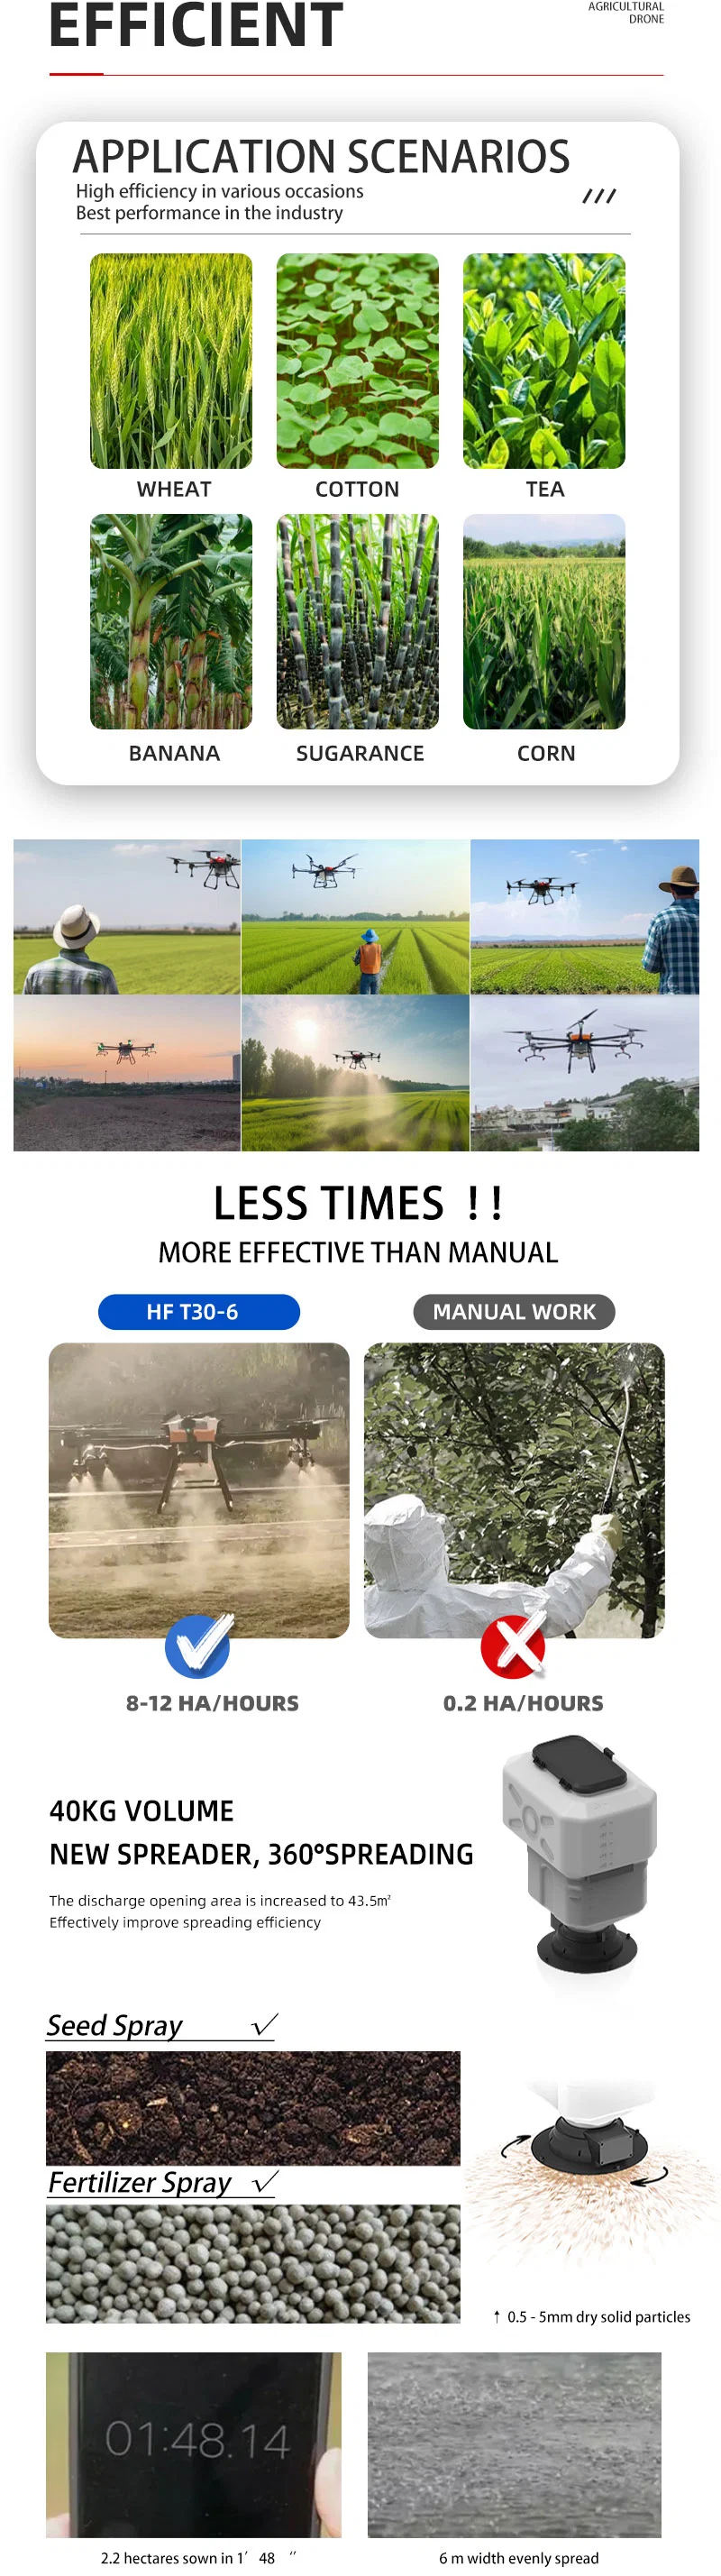 30L Spraying Obstacle Avoidance Fumig Seed Fertilizer Spread Farm Agricultural Plant Protection Agro Drone Sprayer Drones Agricultura with 6 Axis Fixed Wing